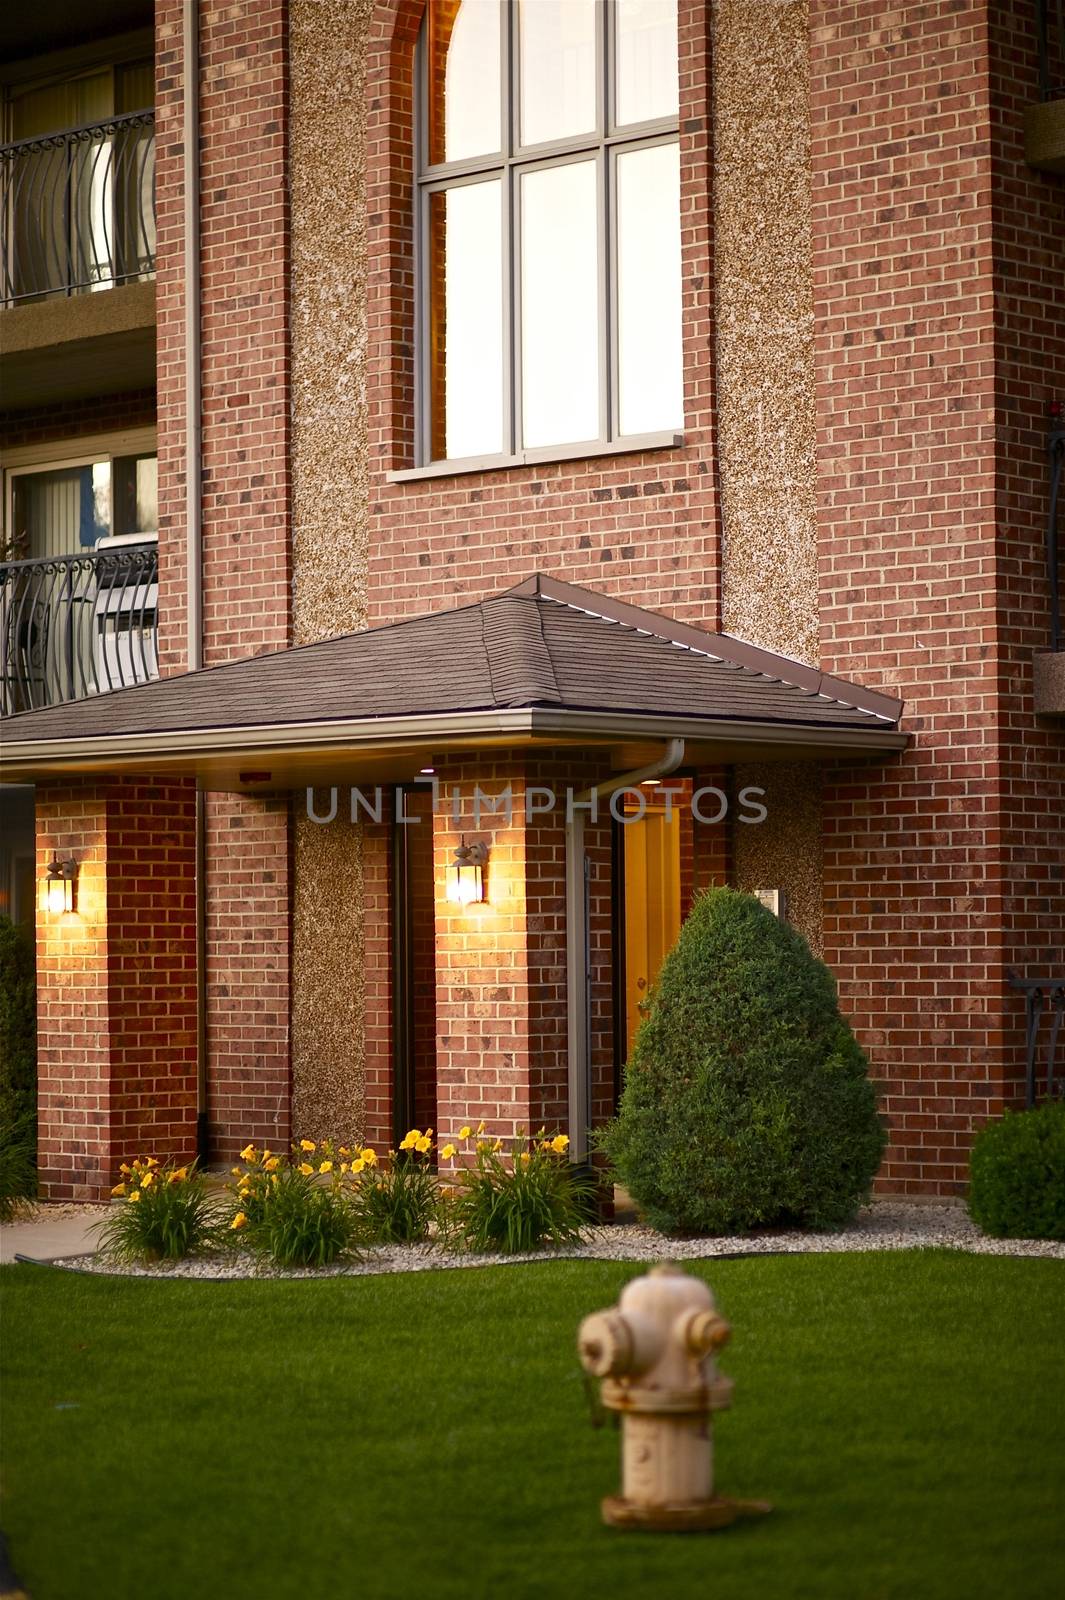 Residential Living - Residential Complex Entrance. 